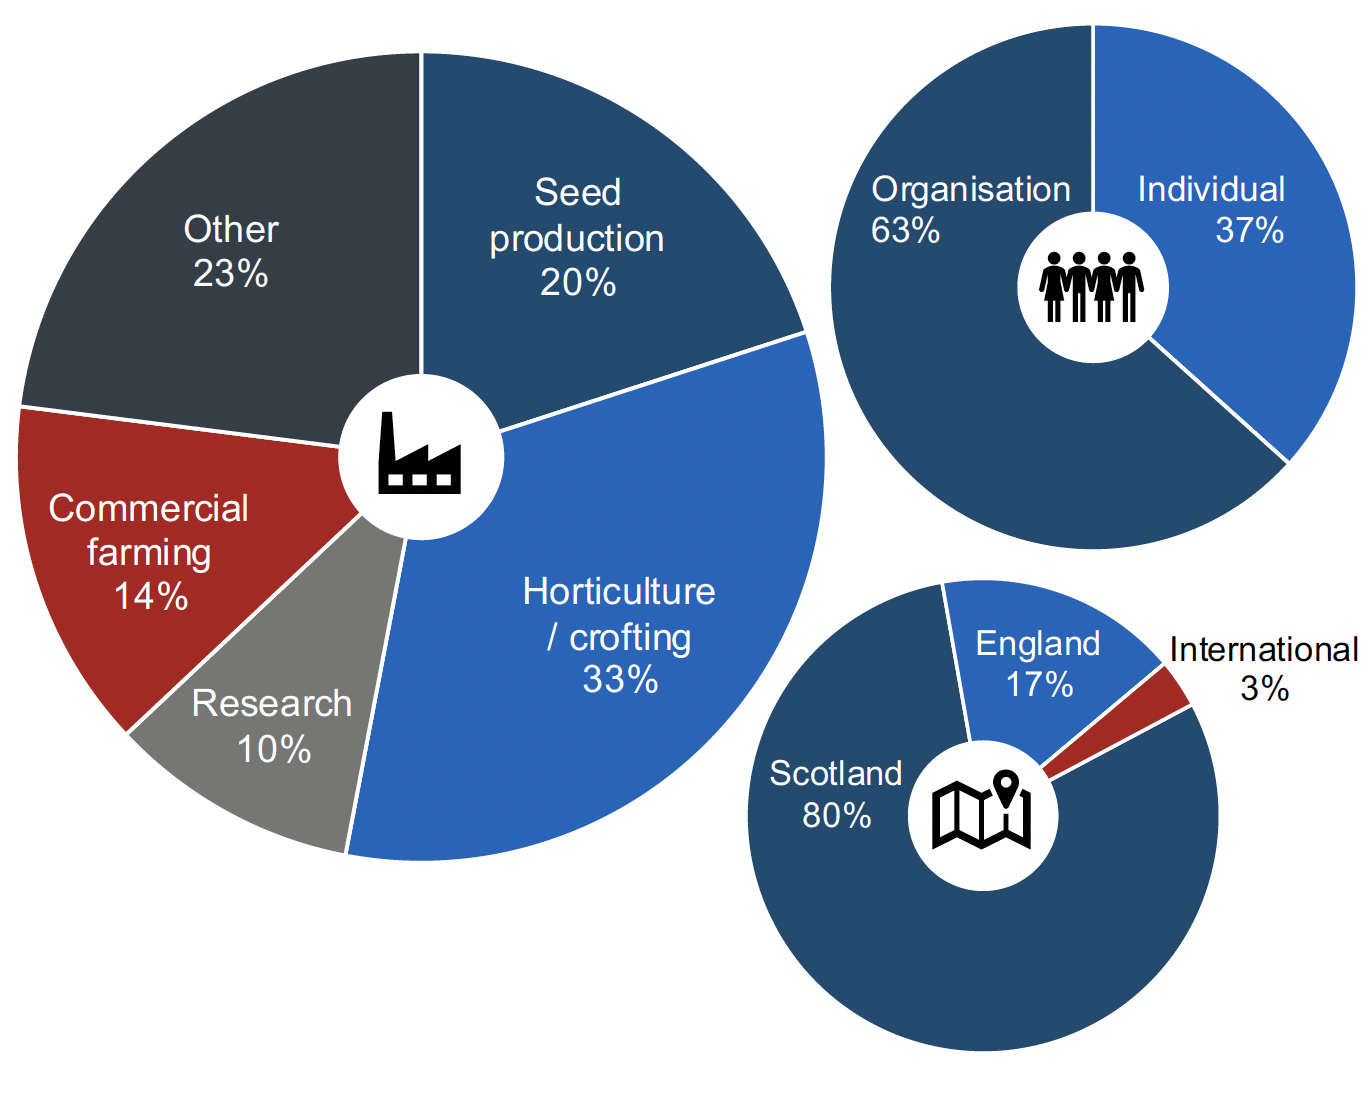 This infographic contains 3 separate doughnut charts with the following respondent breakdowns; Industry sector, broken down by Horticulture / crofting (33%), Seed production (20%), Other (23%), Commercial farming (14%), Research (10%). Respondent type, broken down by Organisation (63%) and Individual (37%).Geographical area, broken down by Scotland (80%), England (17%) and International (3%).